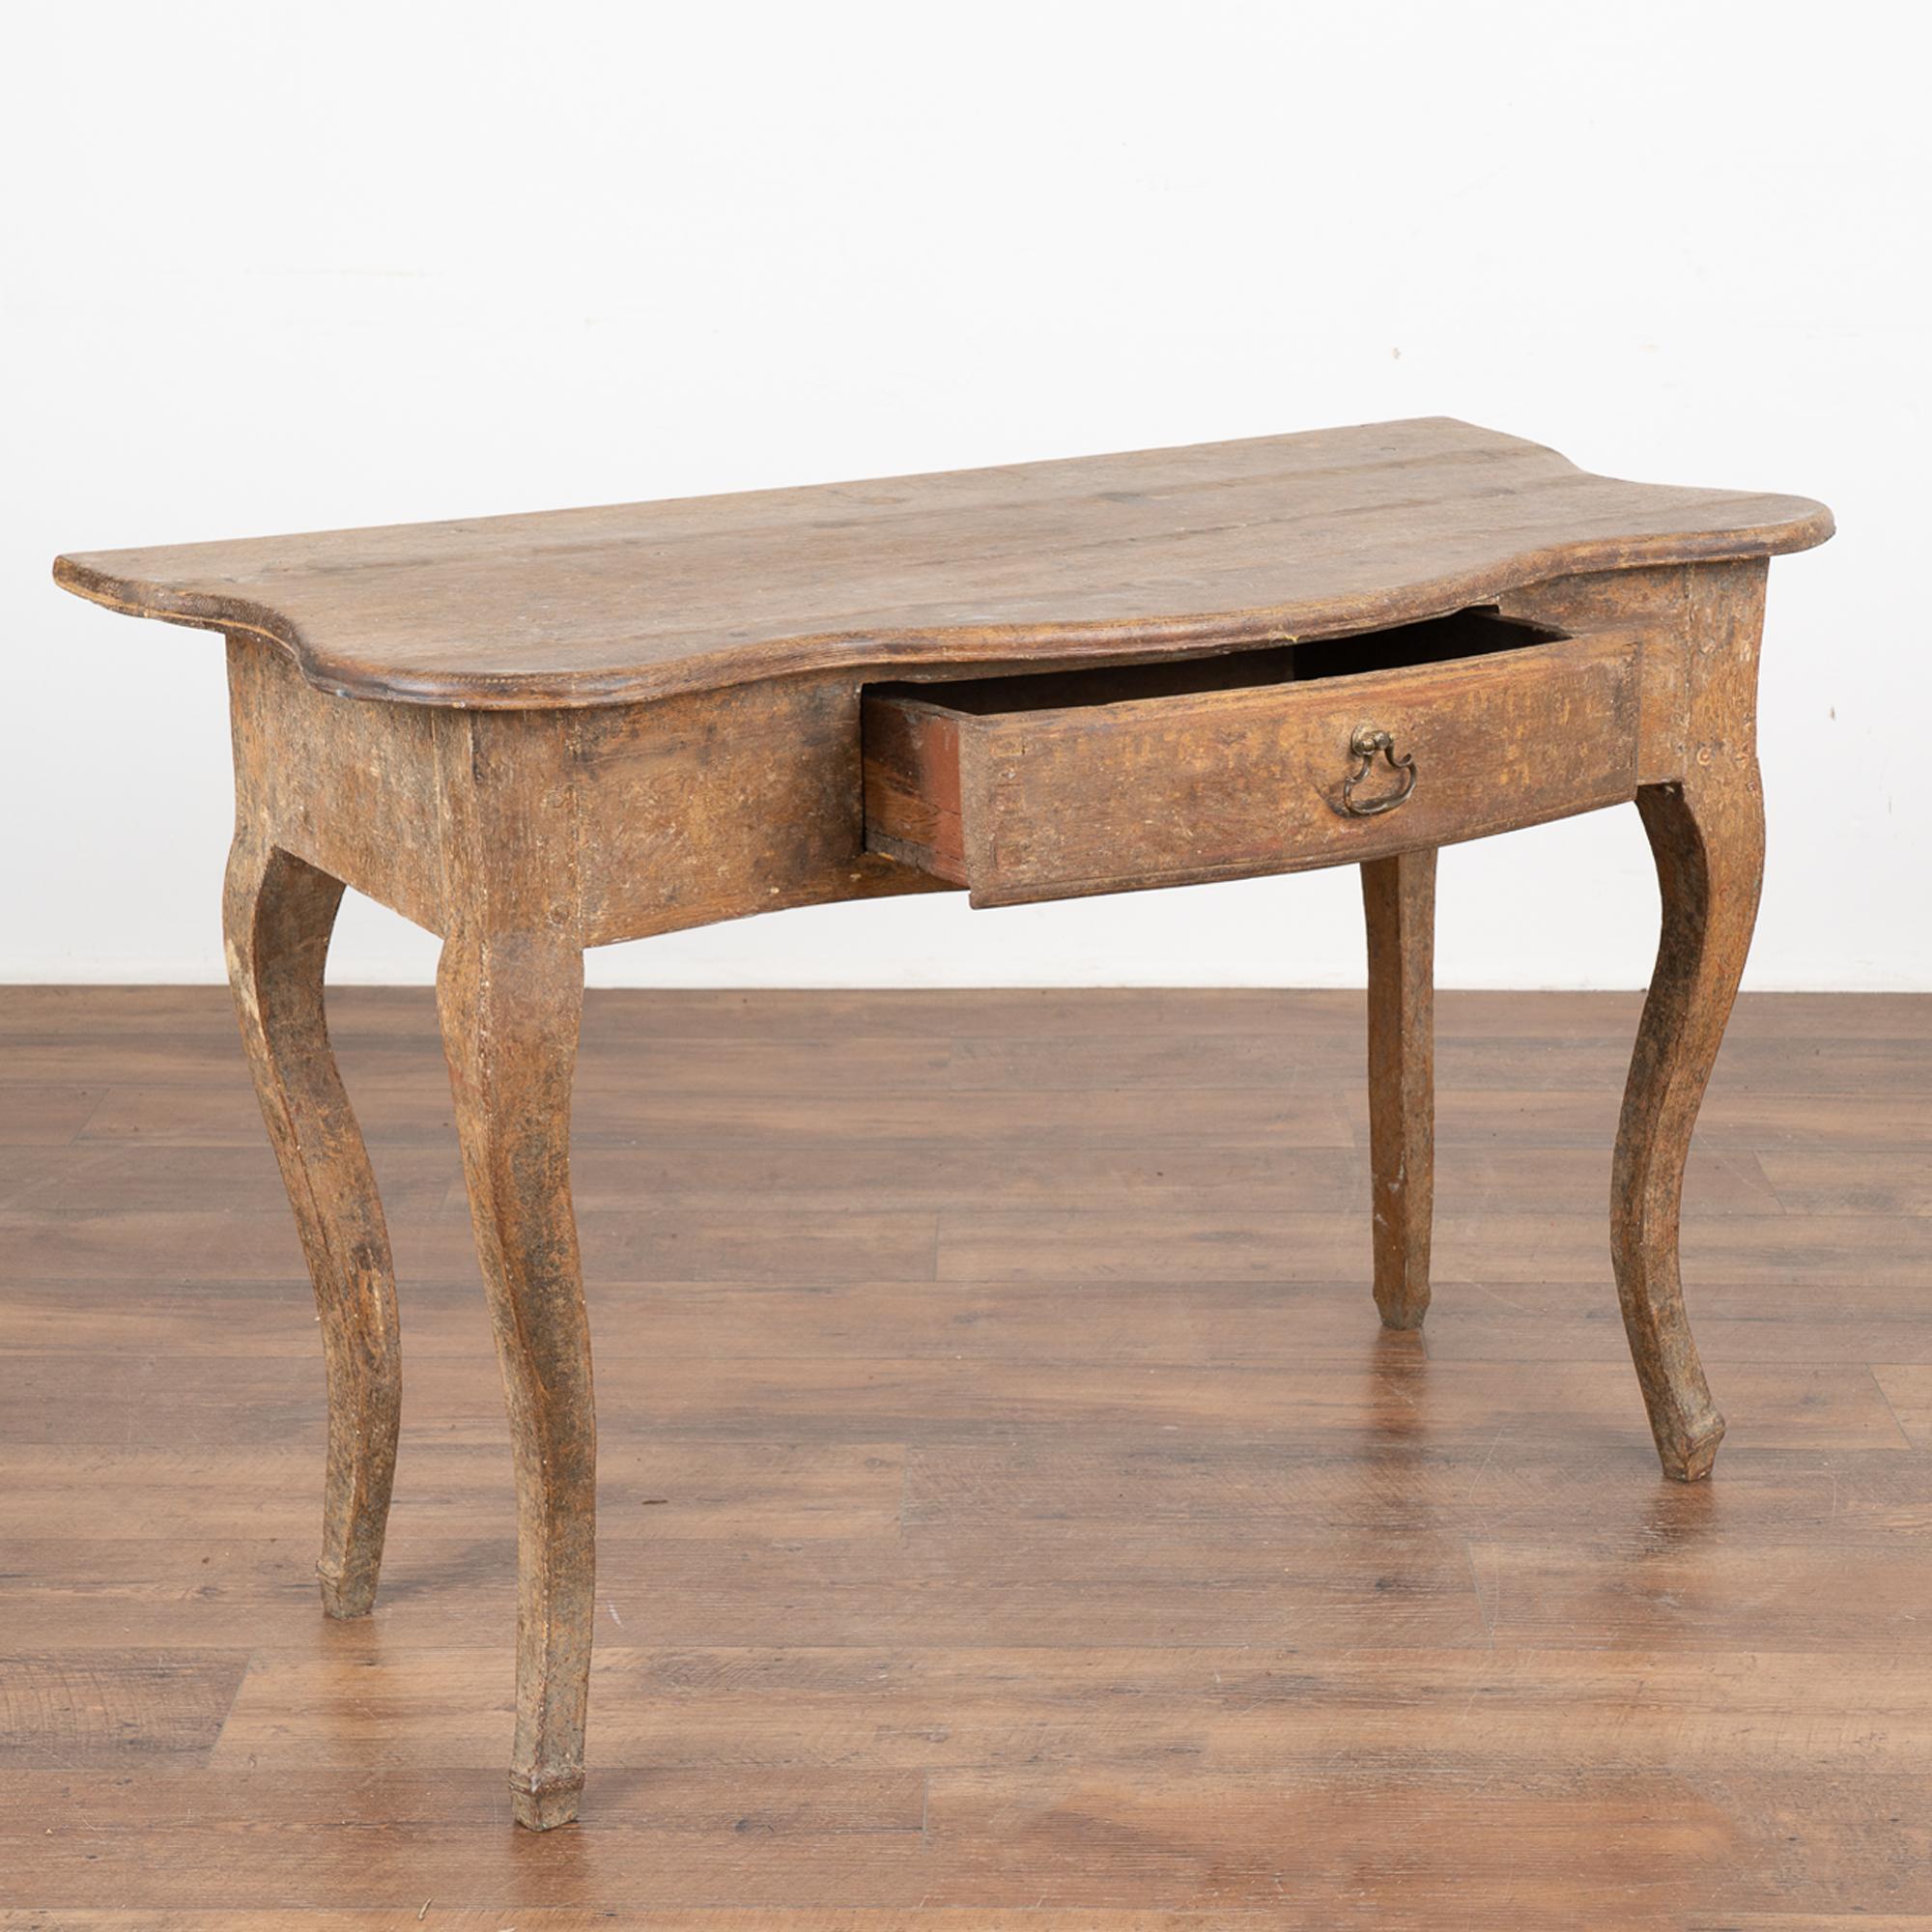 Swedish Antique Rococo Pine Side Table with Drawer, Sweden circa 1770-80 For Sale